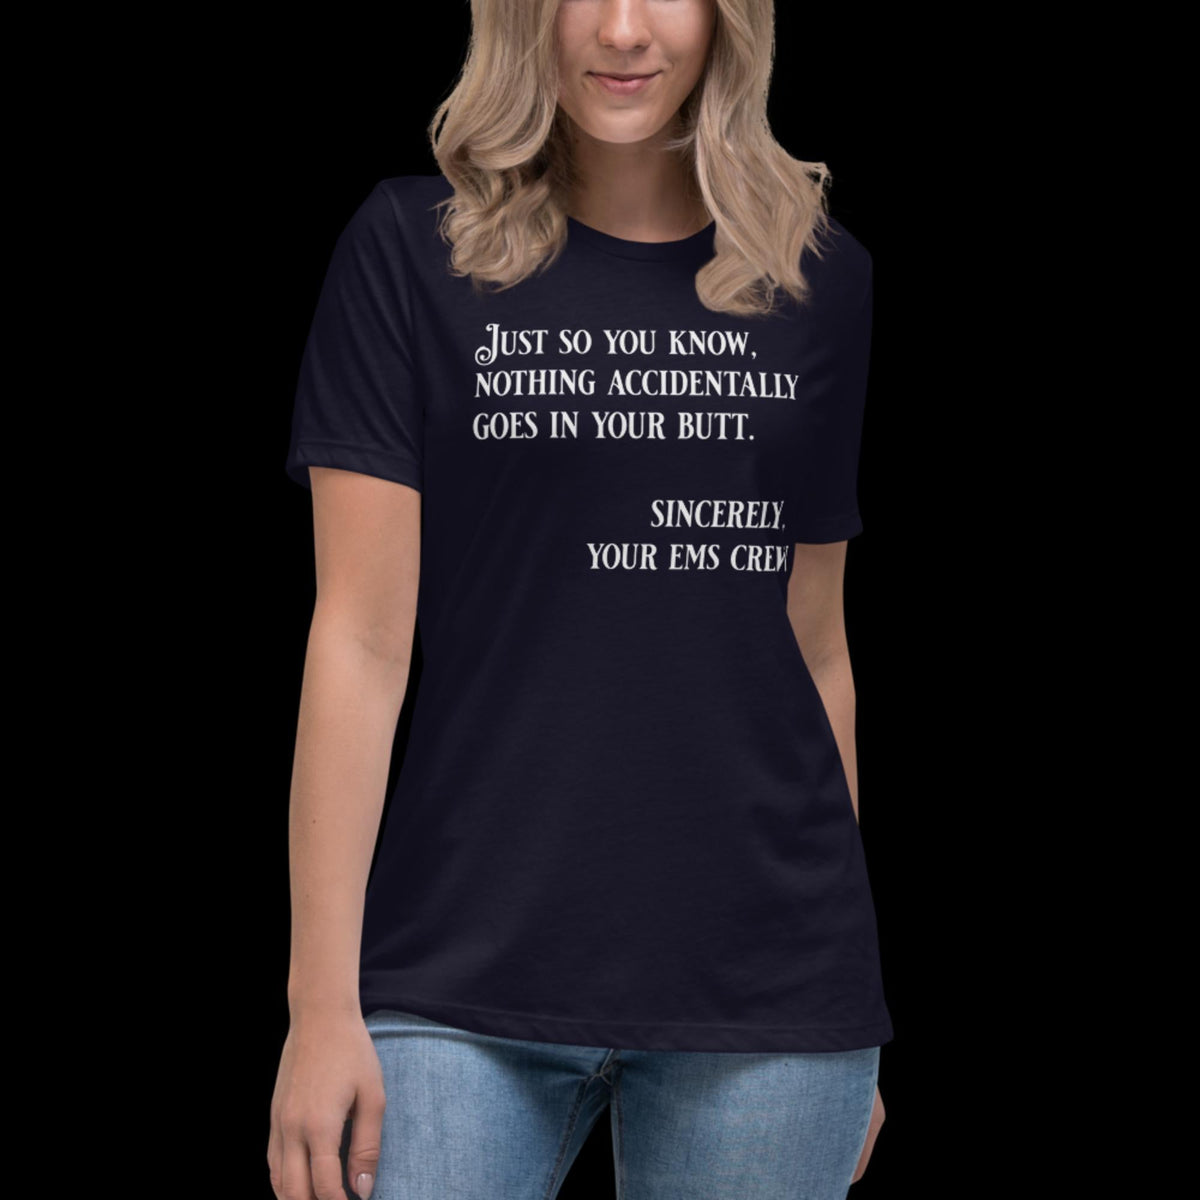 Nothing Accidently Goes In Your Butt - Sincerely, your EMS Crew Women's Relaxed T-Shirt - Salty Medic Clothing Co.